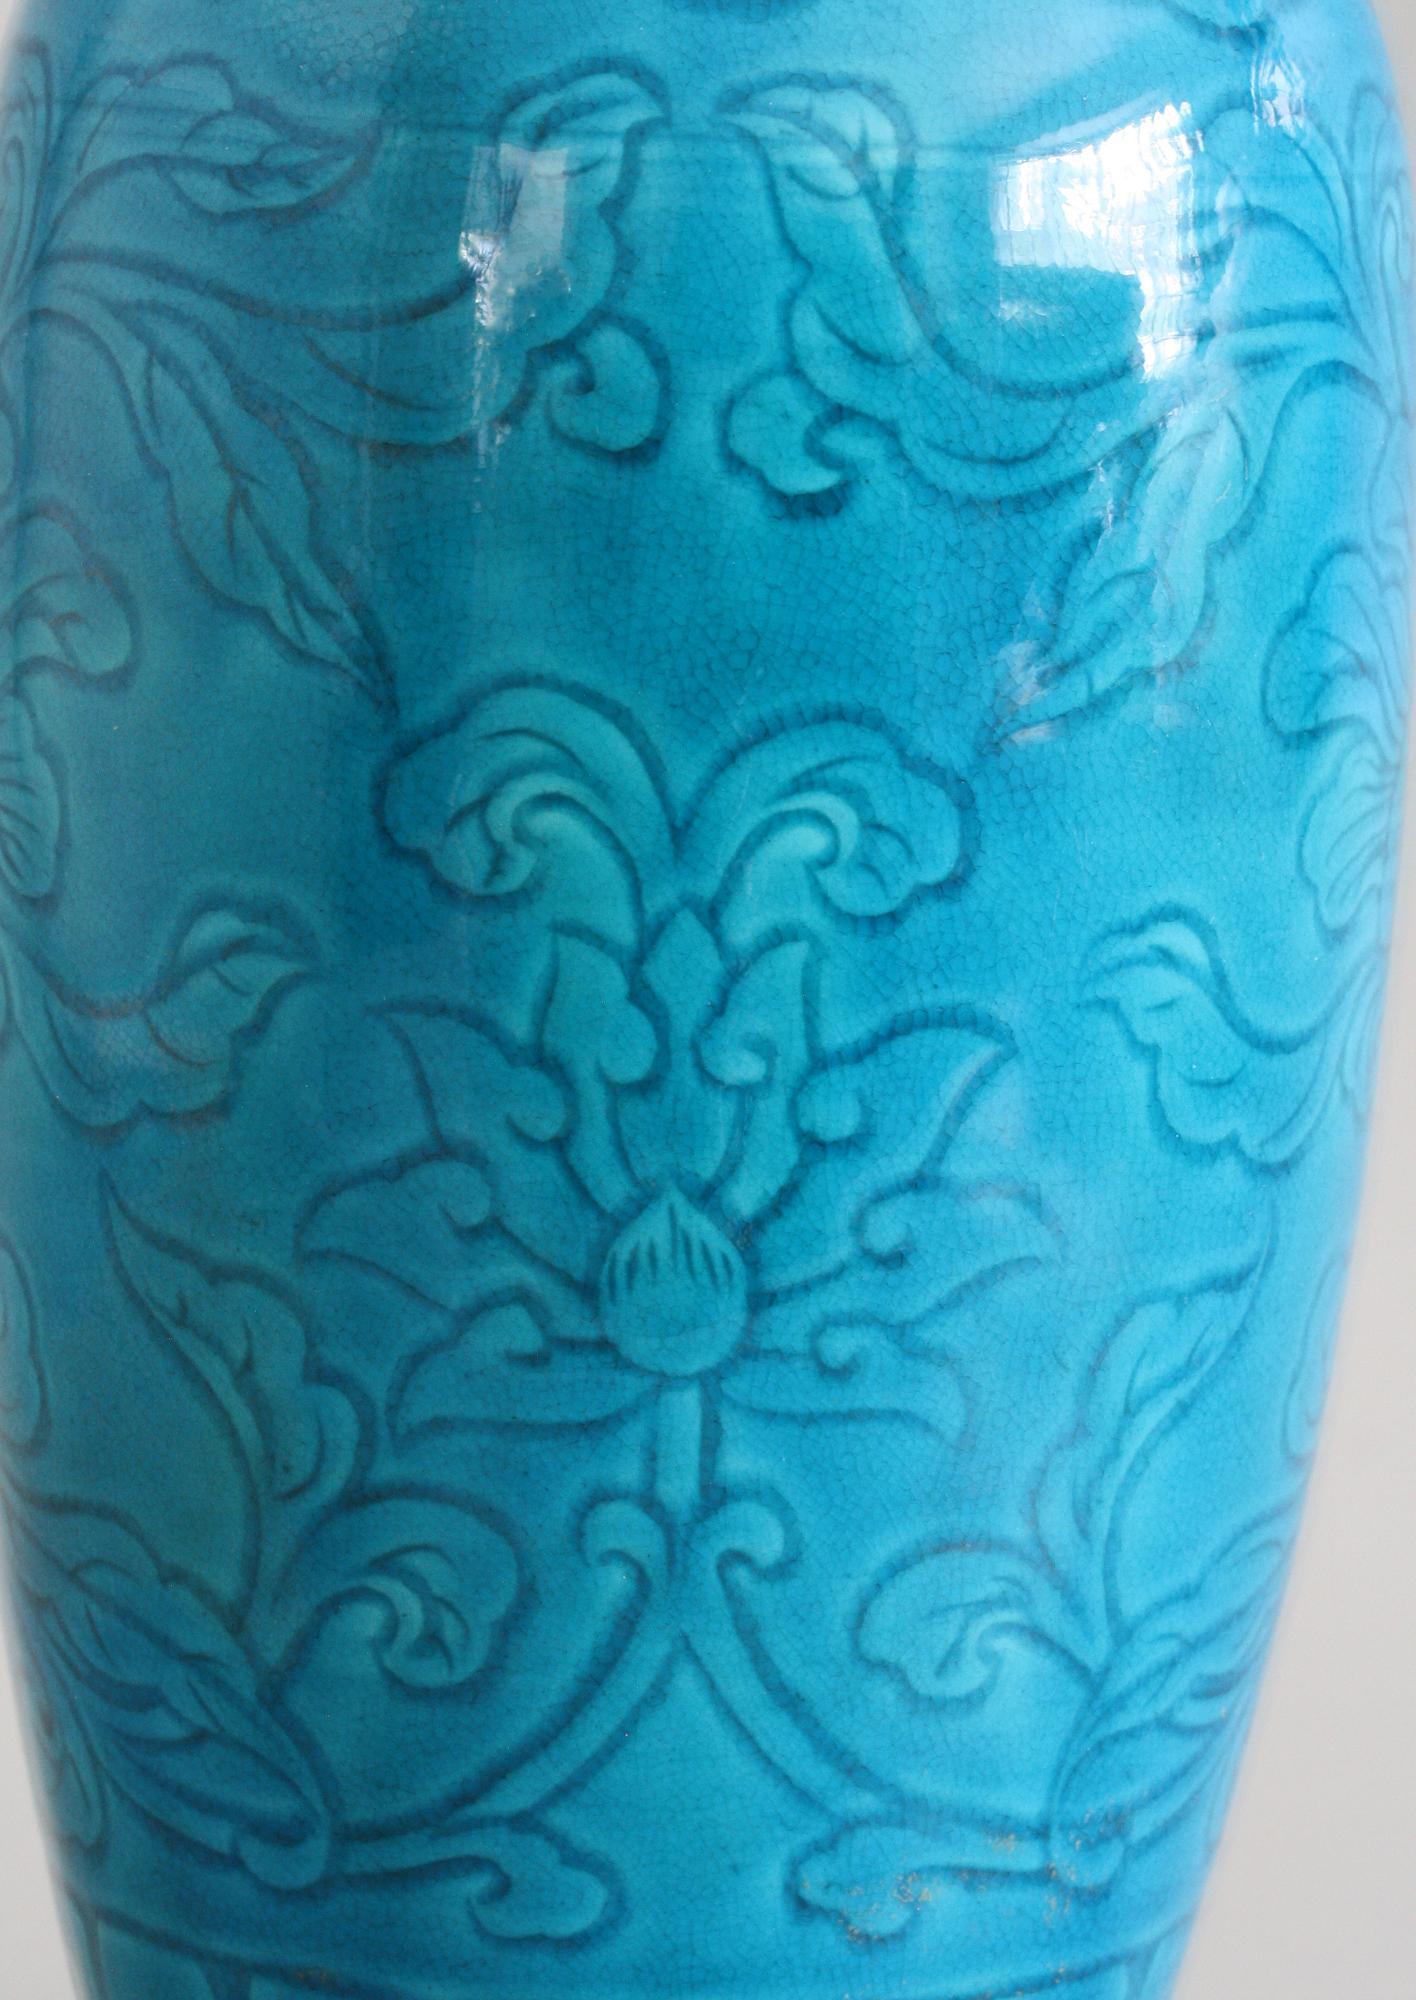 A very fine Chinese porcelain vase decorated with incised floral designs and finished in a bright turquoise glaze believed to date from the 19th or early 20th century. This finely potted Rouleau shaped vase has an incised border around the foot with